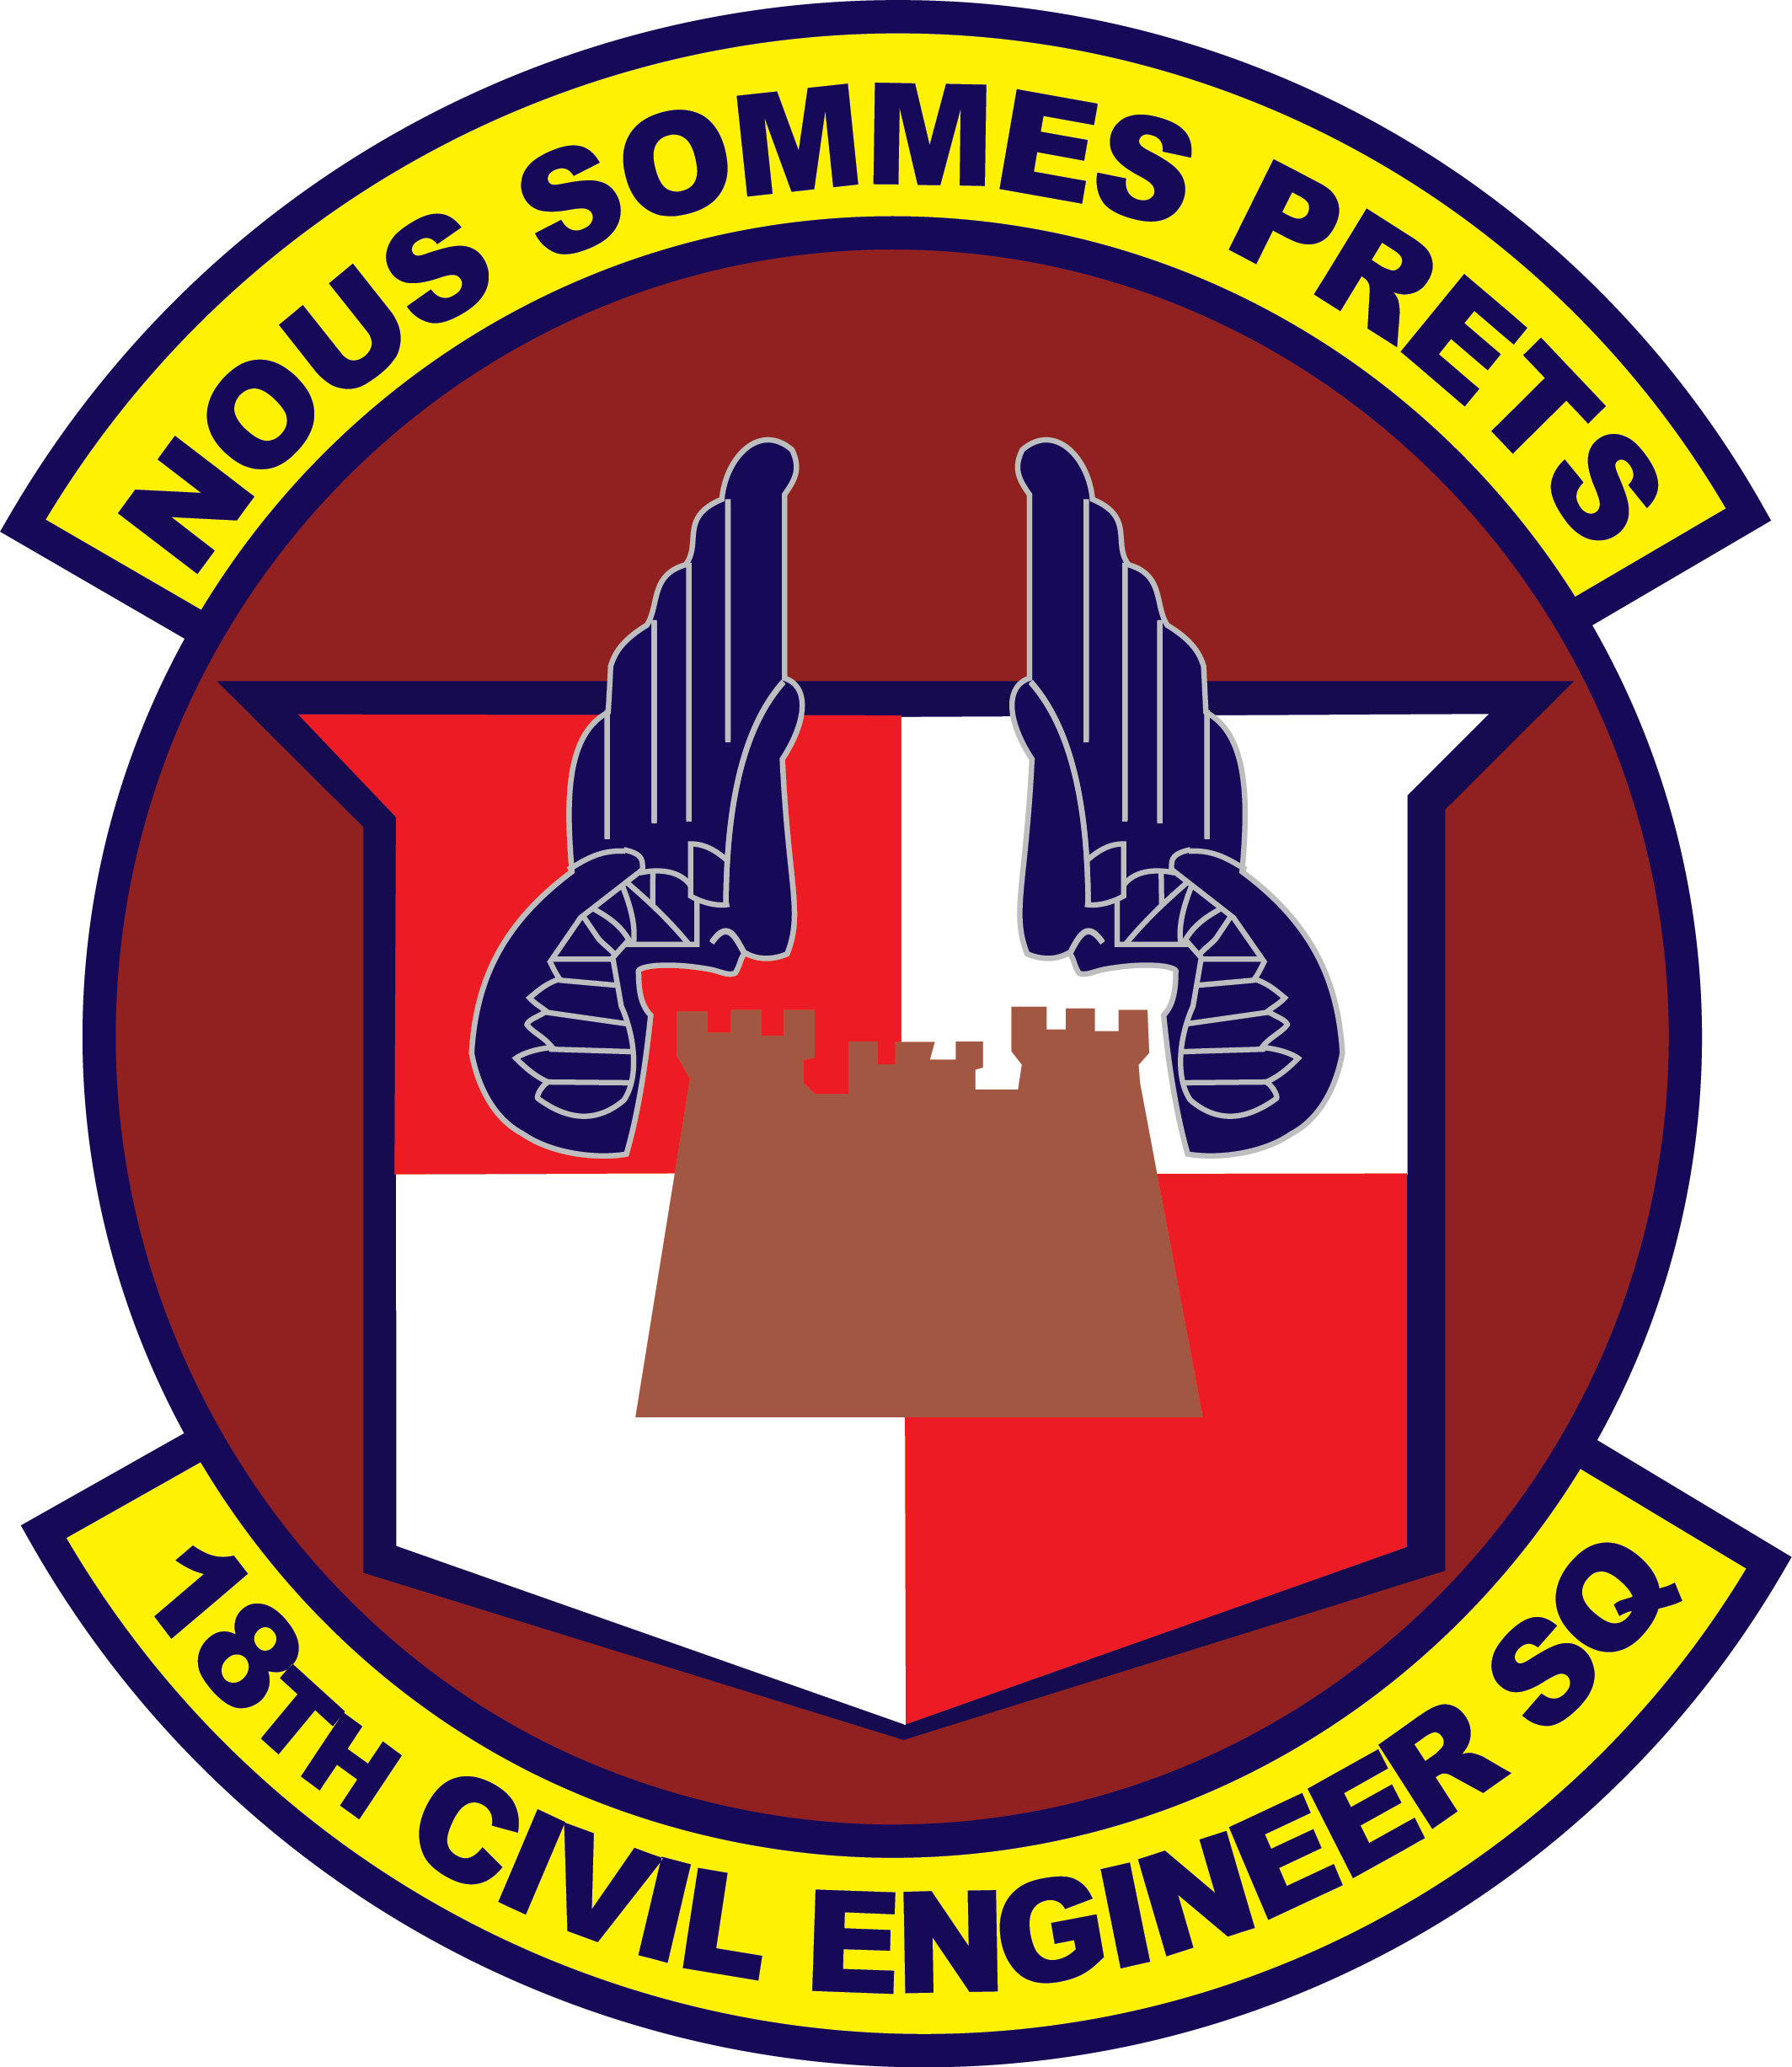 Download Full Image - 18th Civil Engineer Squadron (2127x2453)